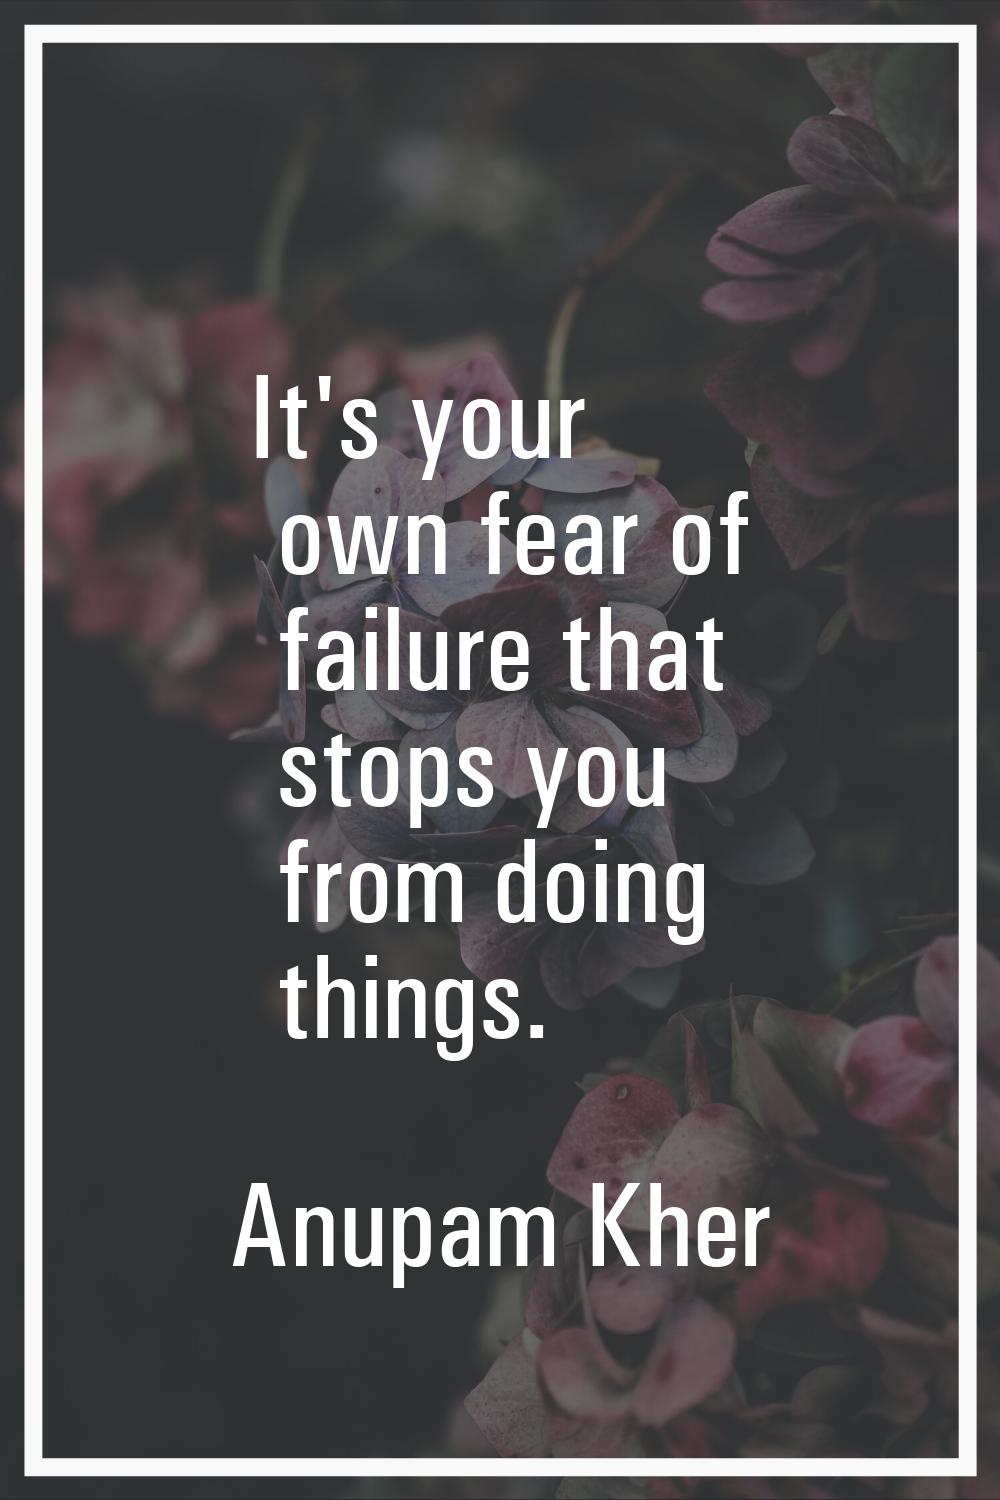 It's your own fear of failure that stops you from doing things.